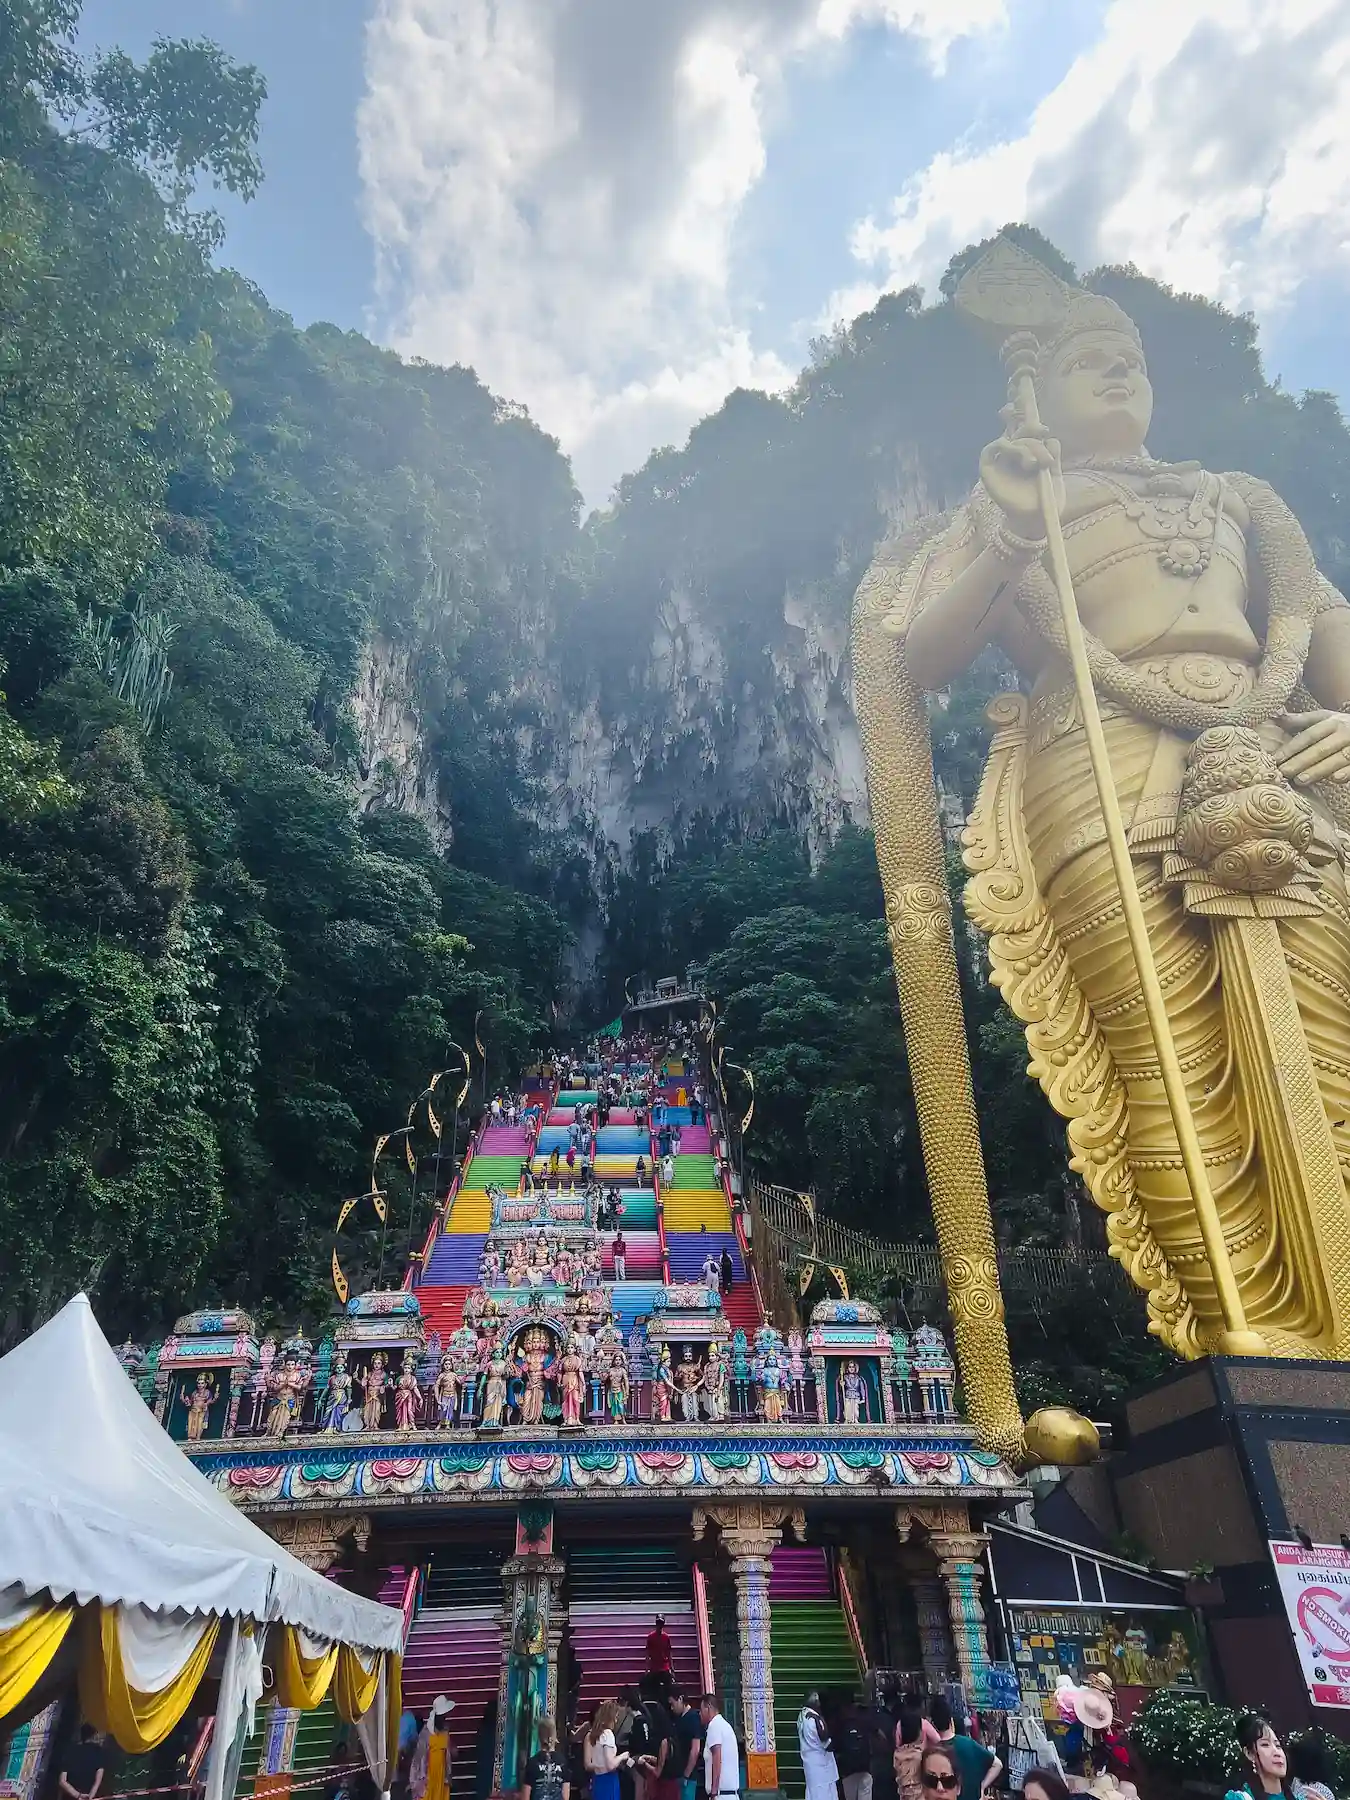 Multicolored steps and giant Hindu statue leading up to entrance of Batu Caves in Kuala Lumpur